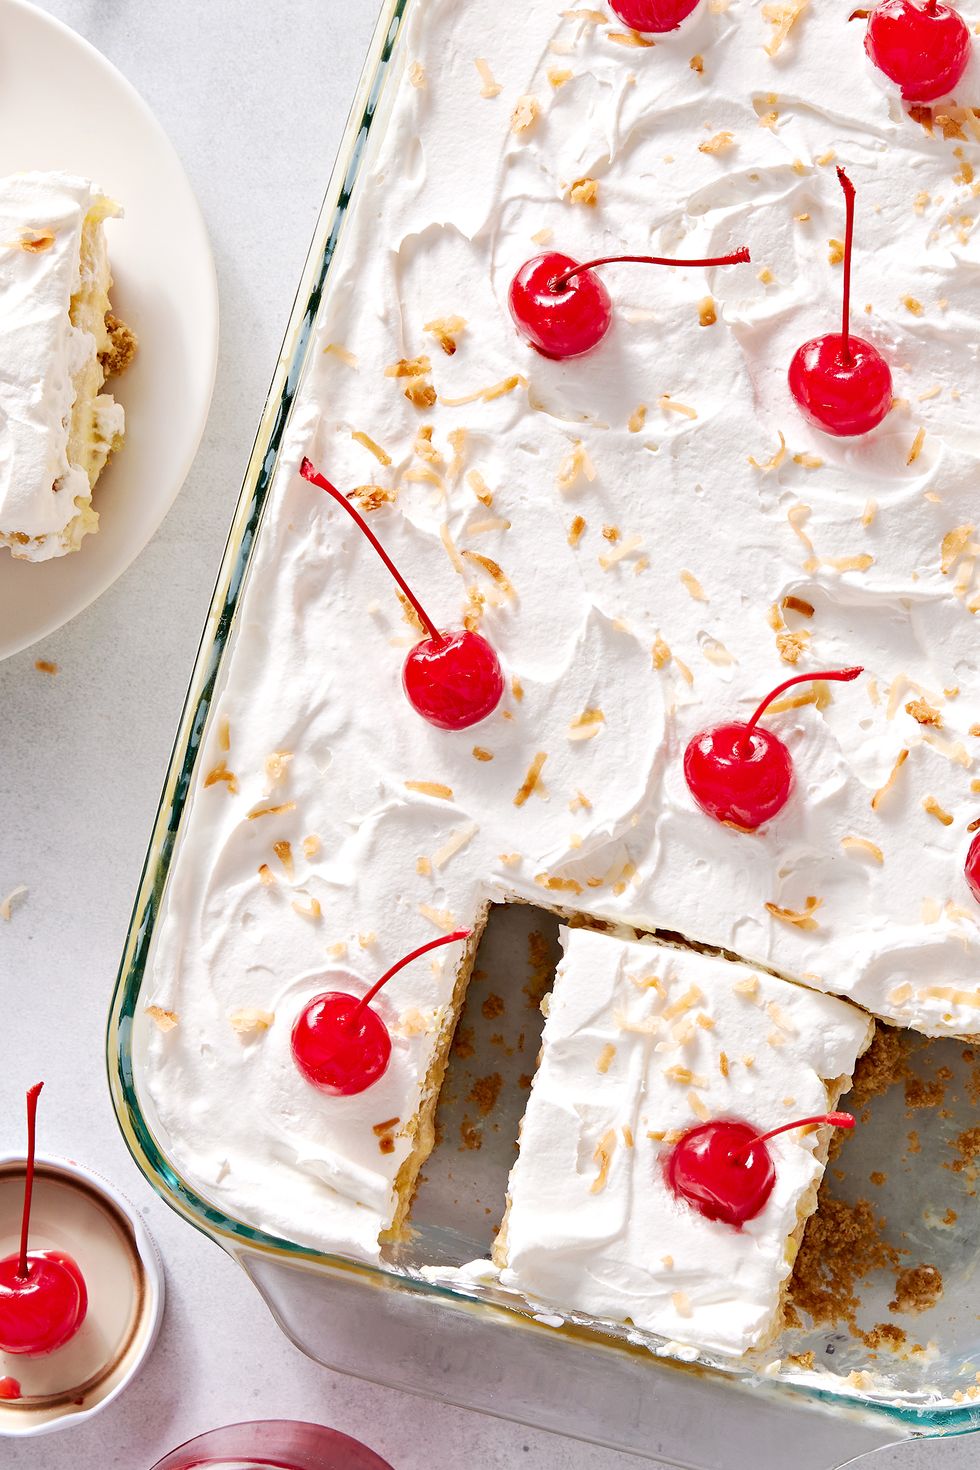 creamy coconut lime cheesecake layered with buttery shortbread cookies, crushed pineapple jello, cool whipped cream, and maraschino cherries all on a graham cracker coconut crust